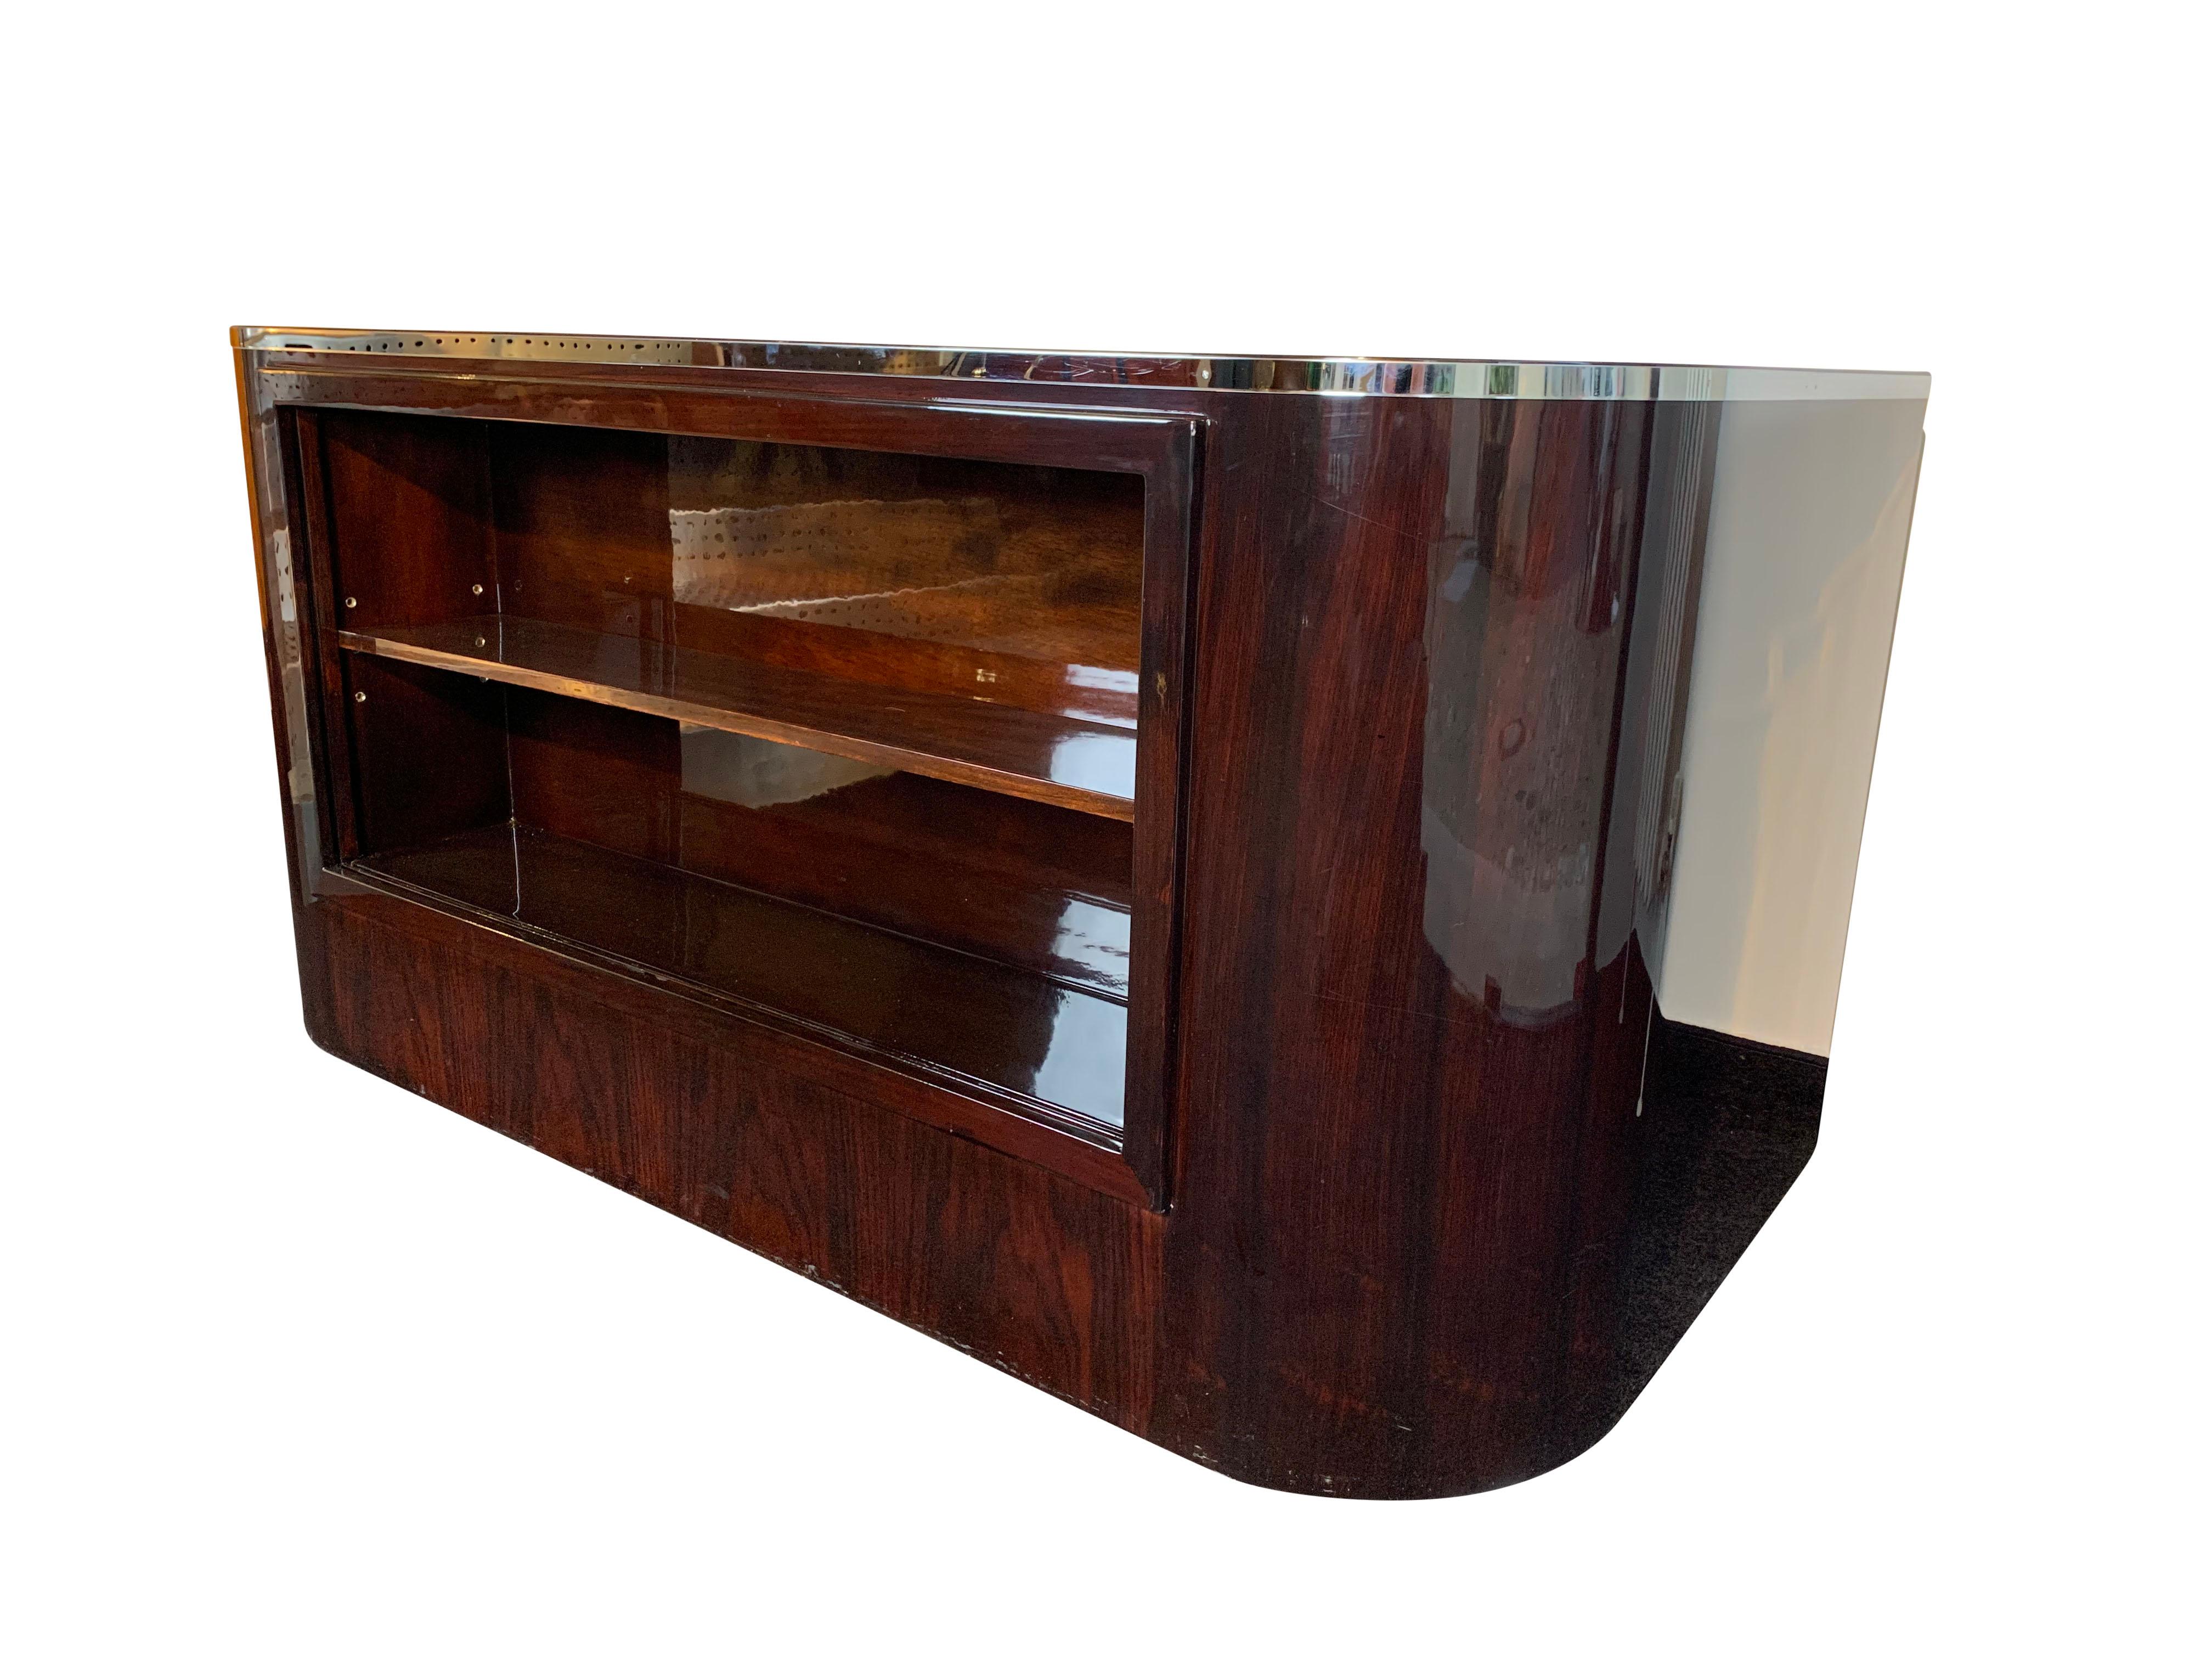 Polished Lacquered Rosewood Desk by Erich Diekmann, Bauhaus, Germany, 1920s For Sale